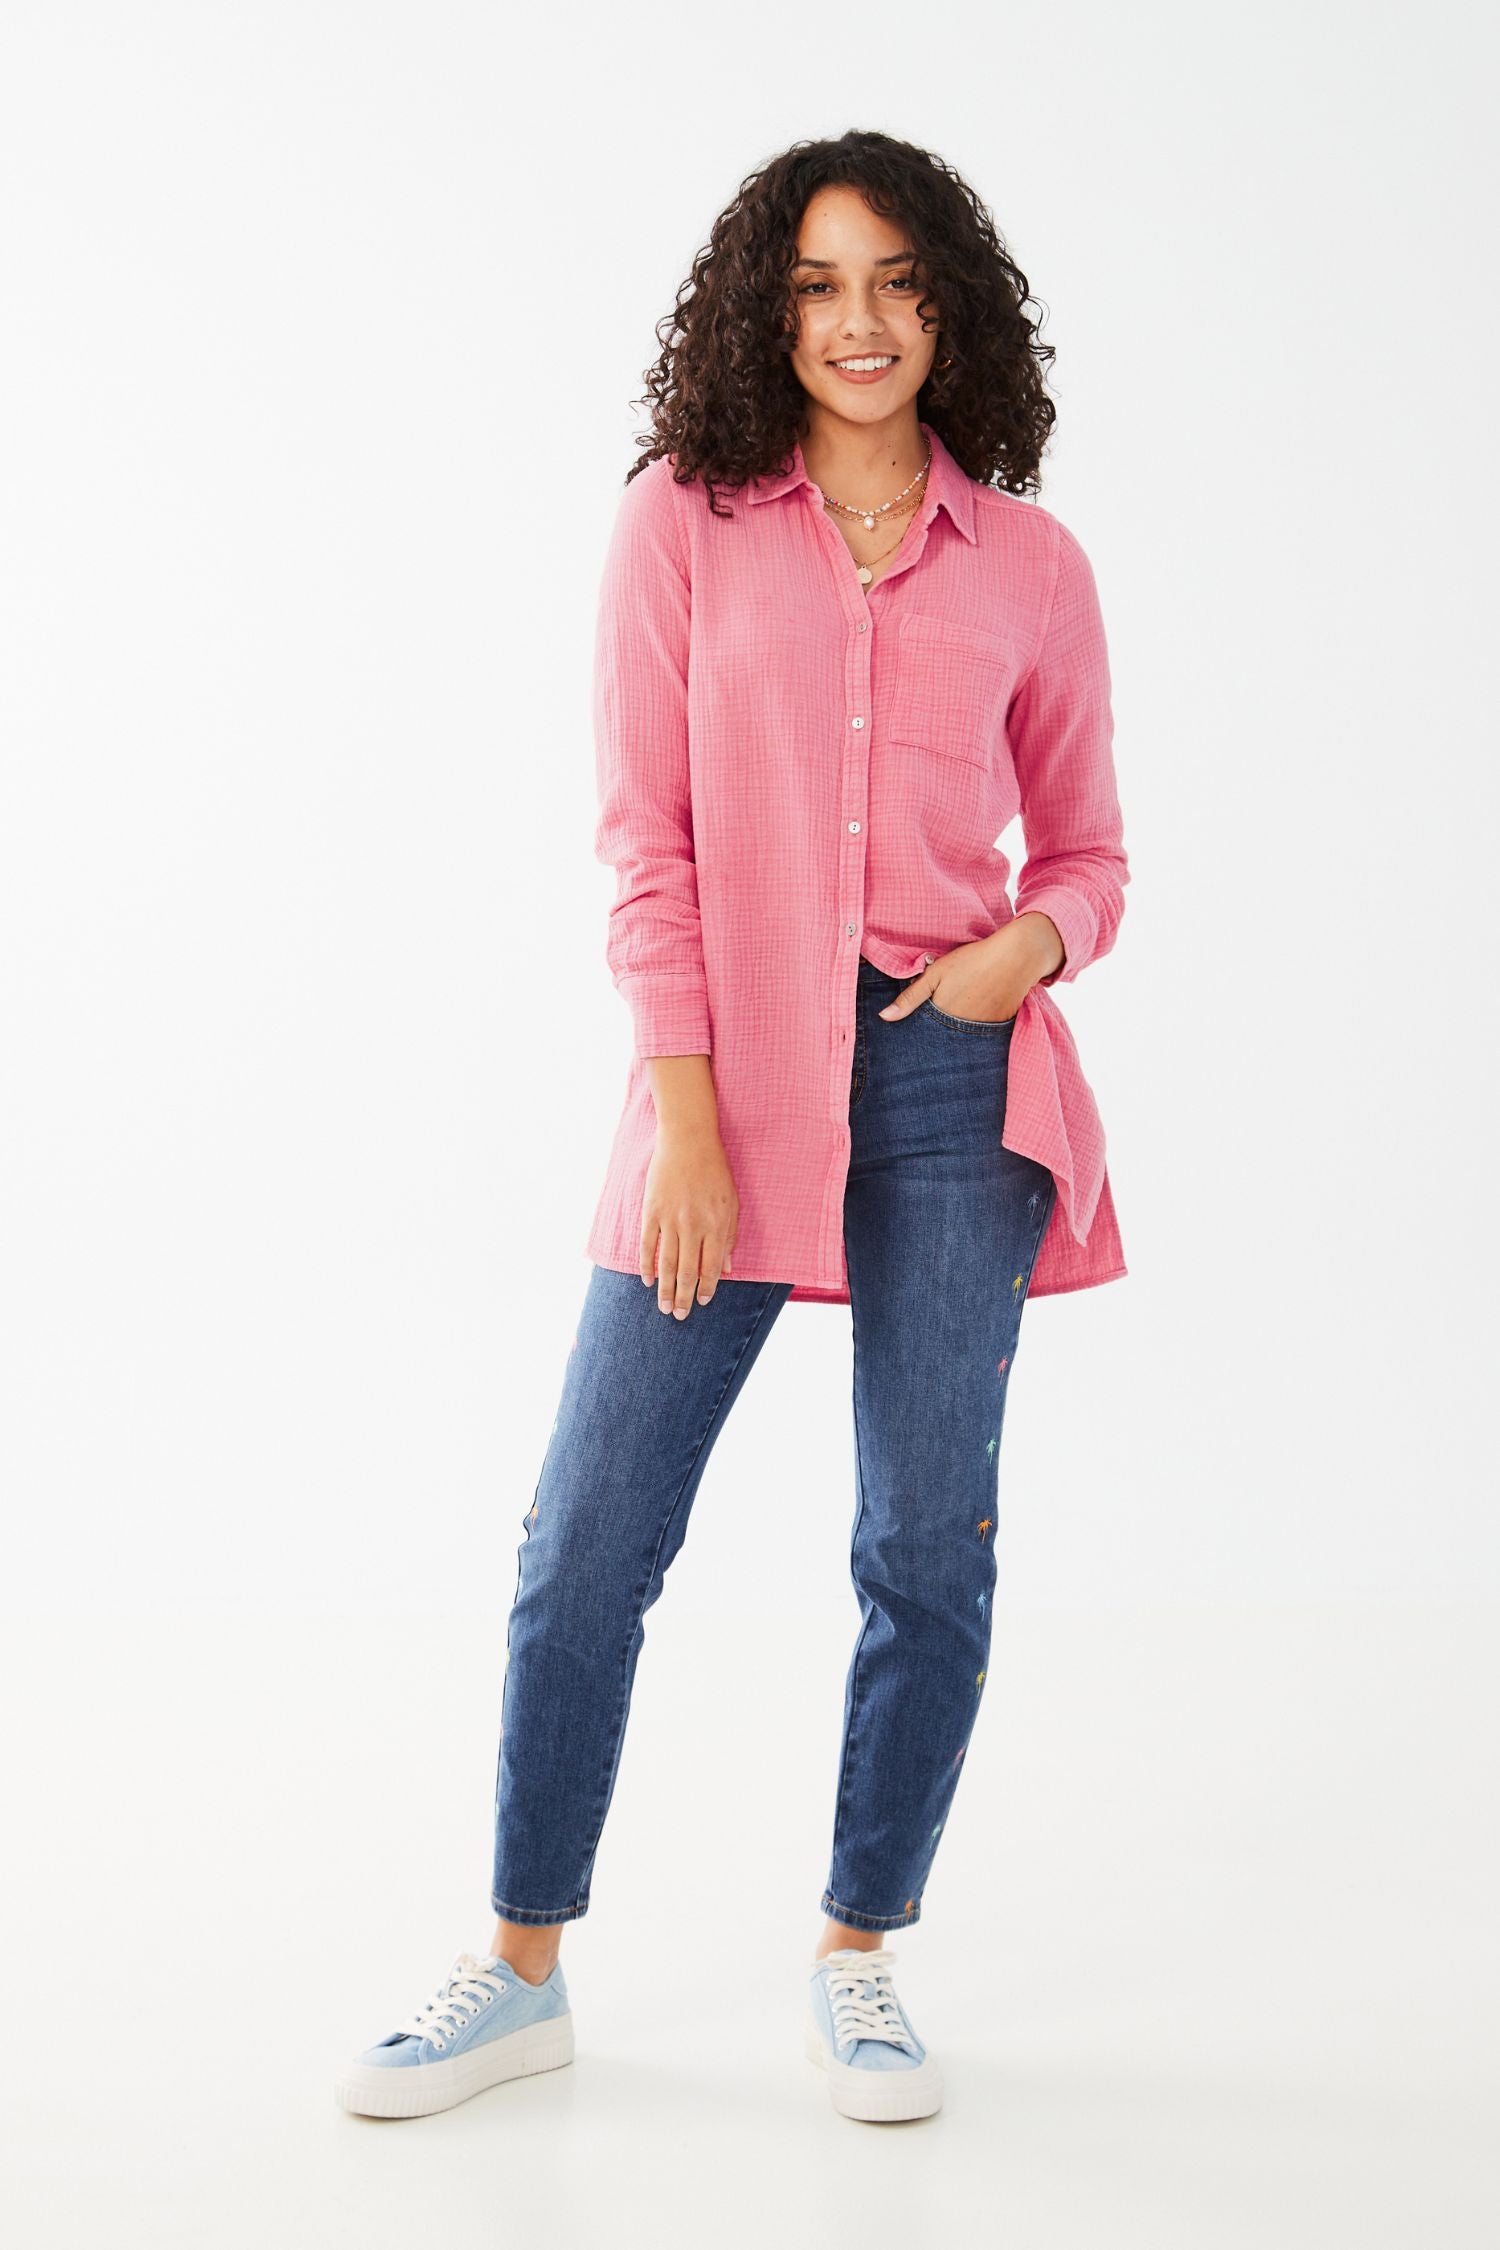 FDJ Long Sleeve Crinkle Cotton Tunic - Style 7122975F, pink, front